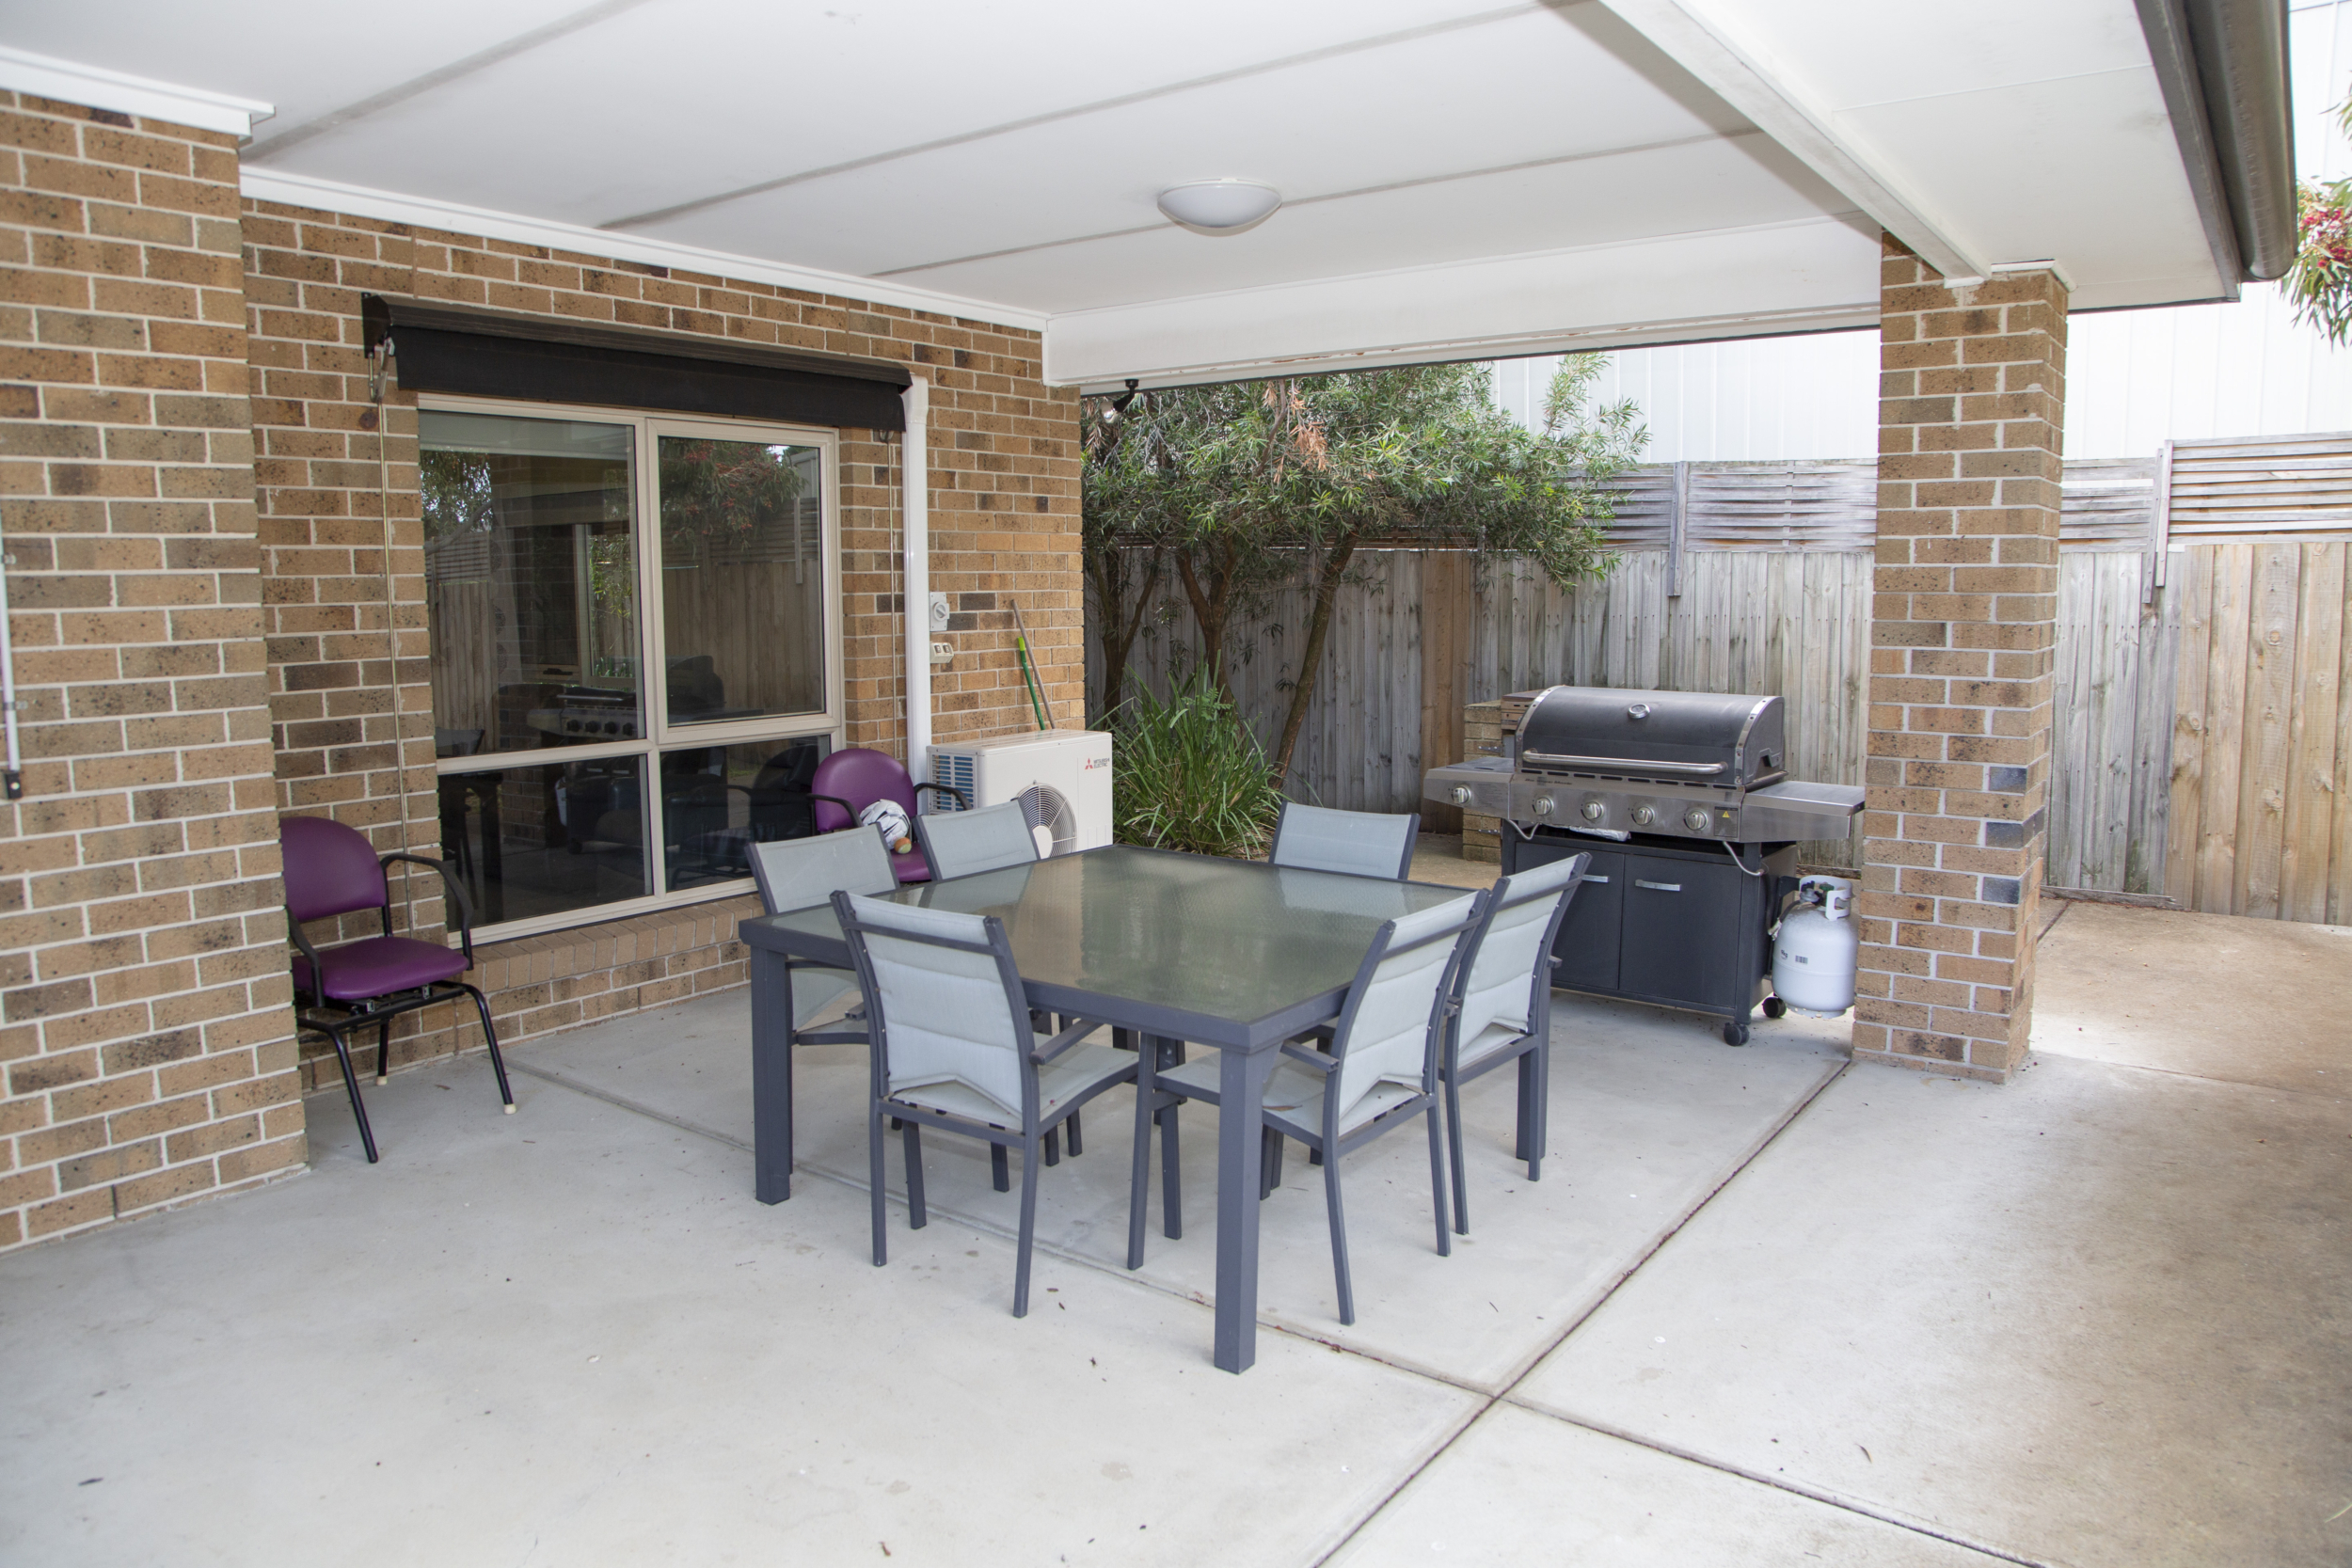 Backyard area with table and chairs and barbeque undercover